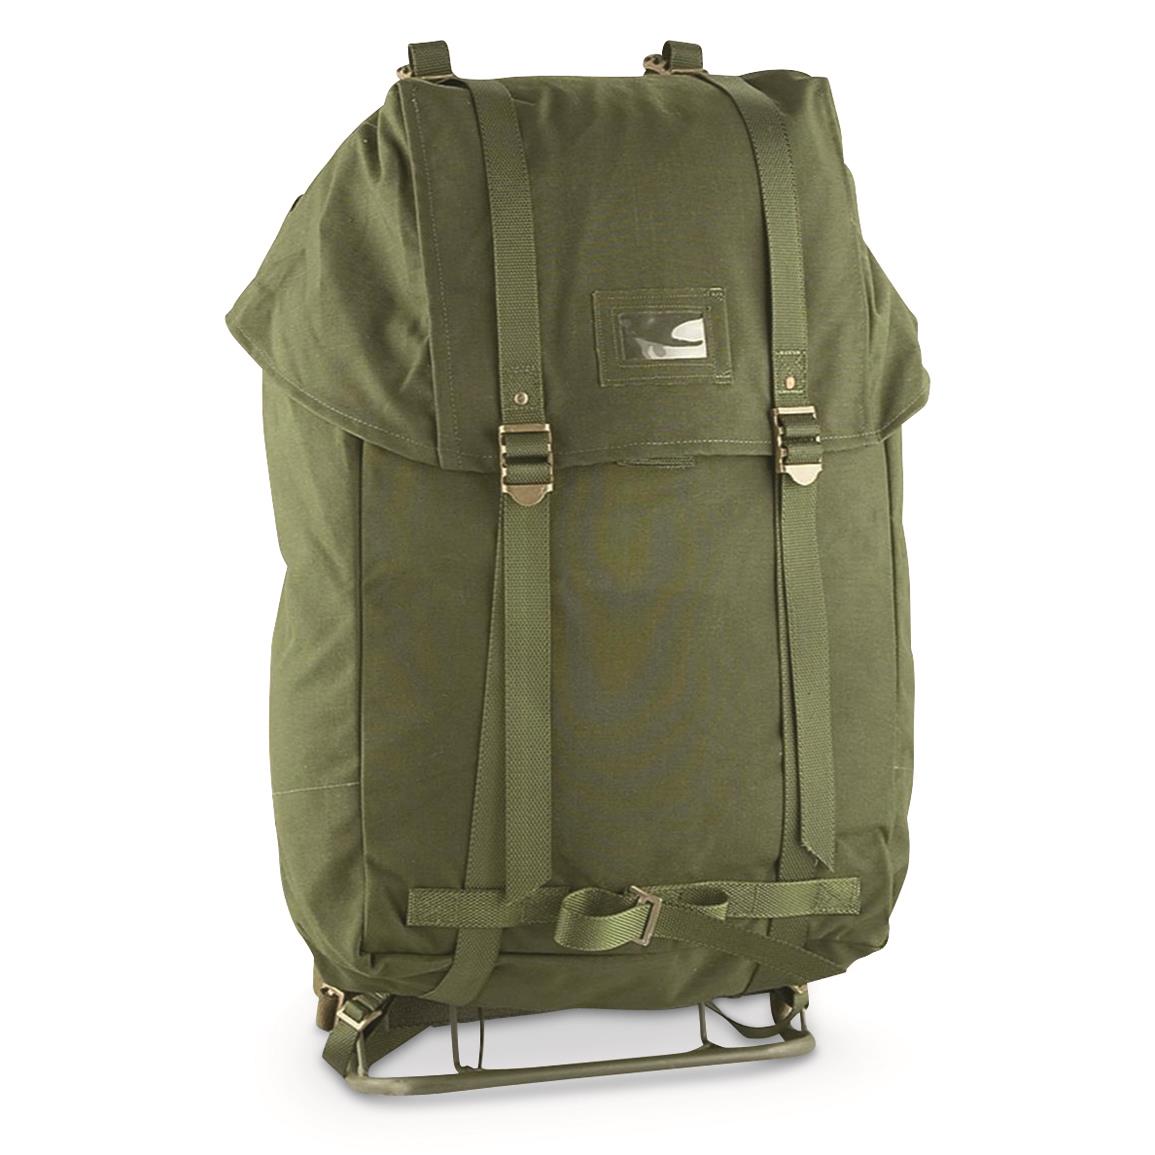 Used Swedish Military Surplus 35L Rucksack with Frame - 642726 ...